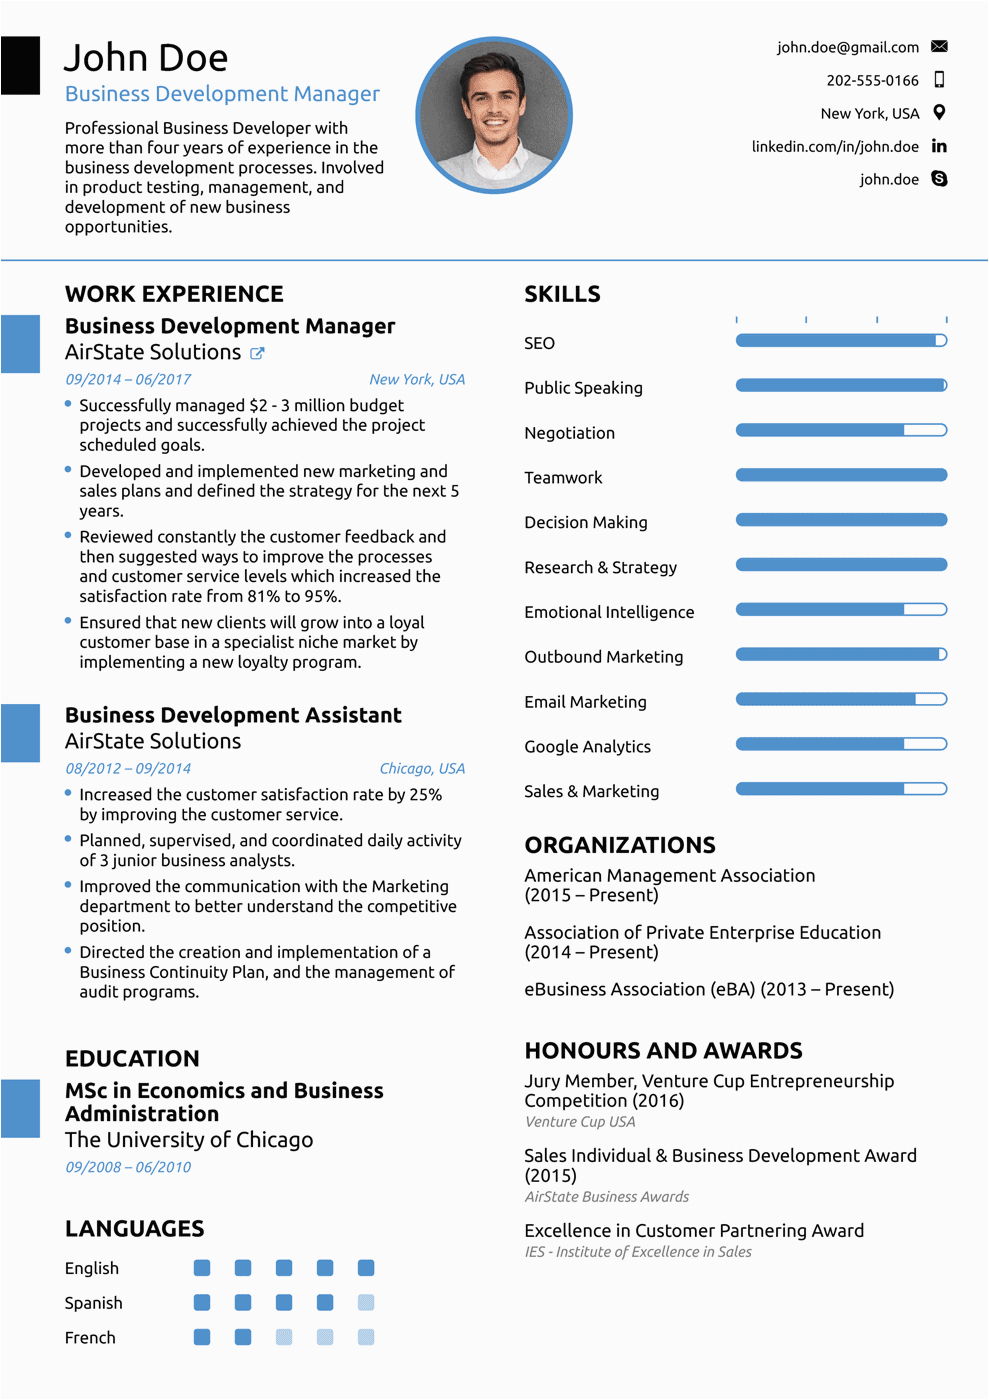 Best Resume Templates for Experienced It Professionals 8 Best Line Resume Templates Of 2018 [download & Customize]